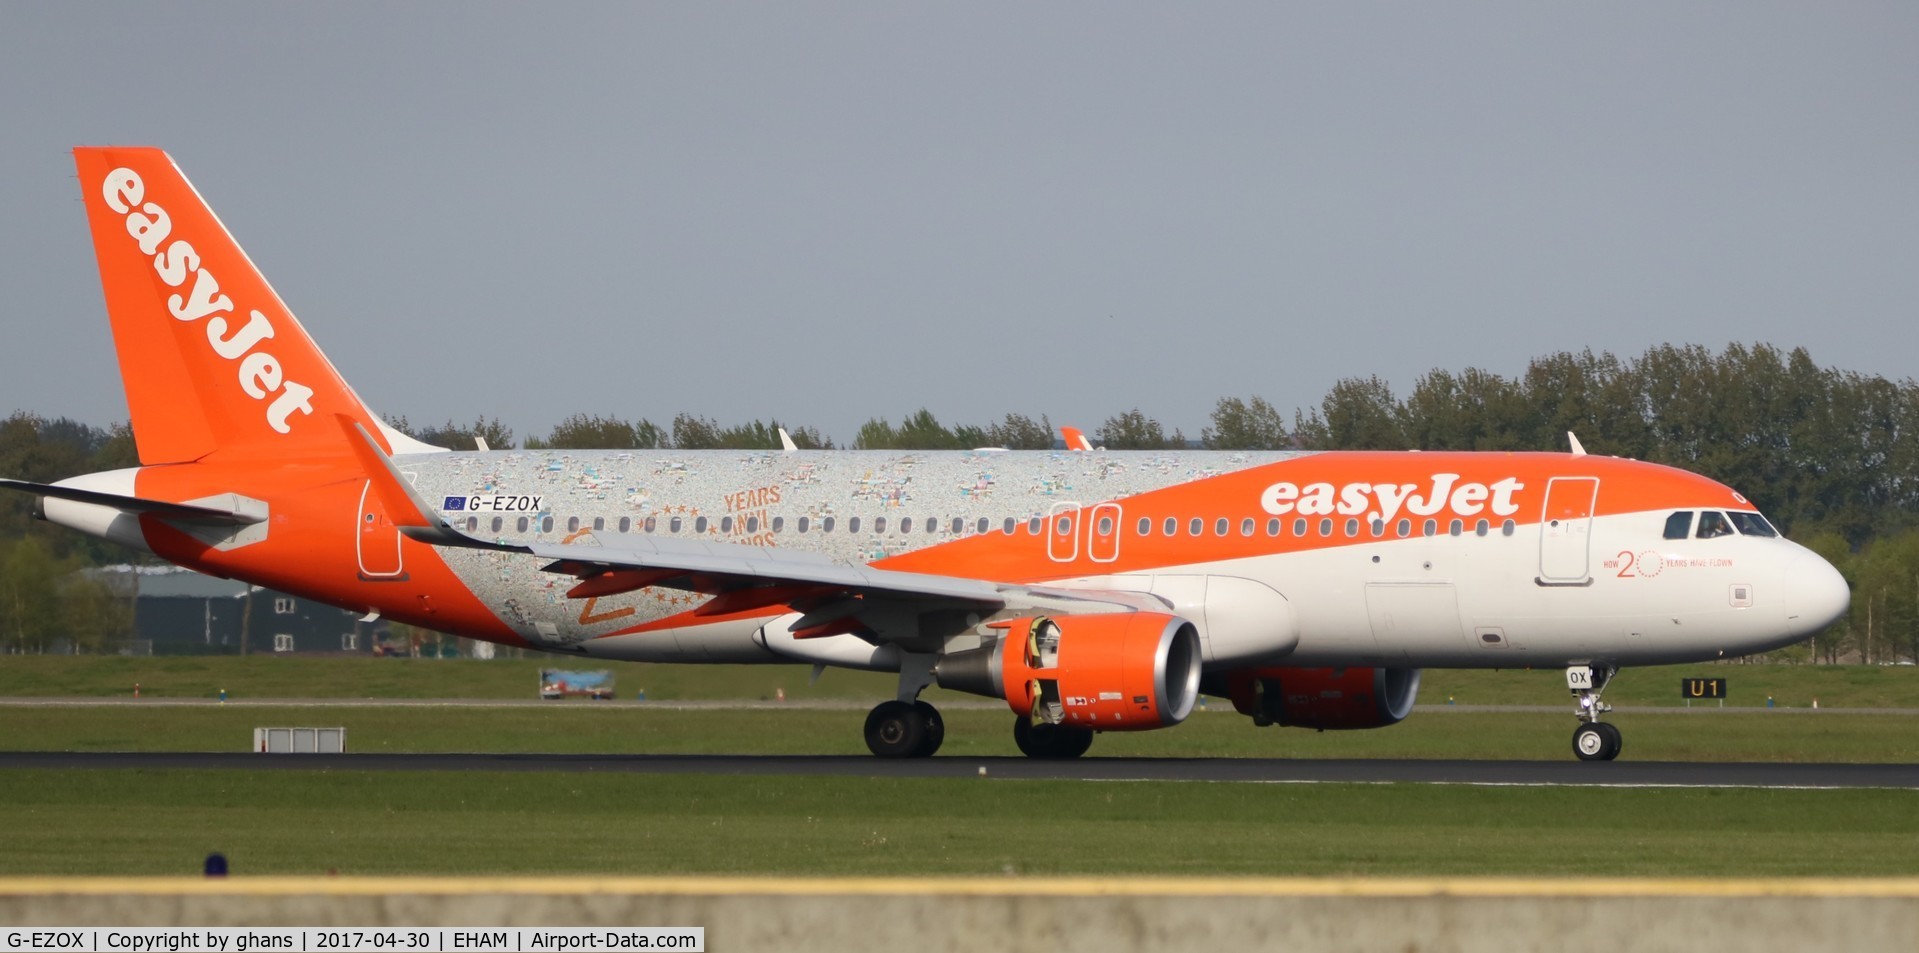 G-EZOX, 2015 Airbus A320-214 C/N 6837, 20 years livery